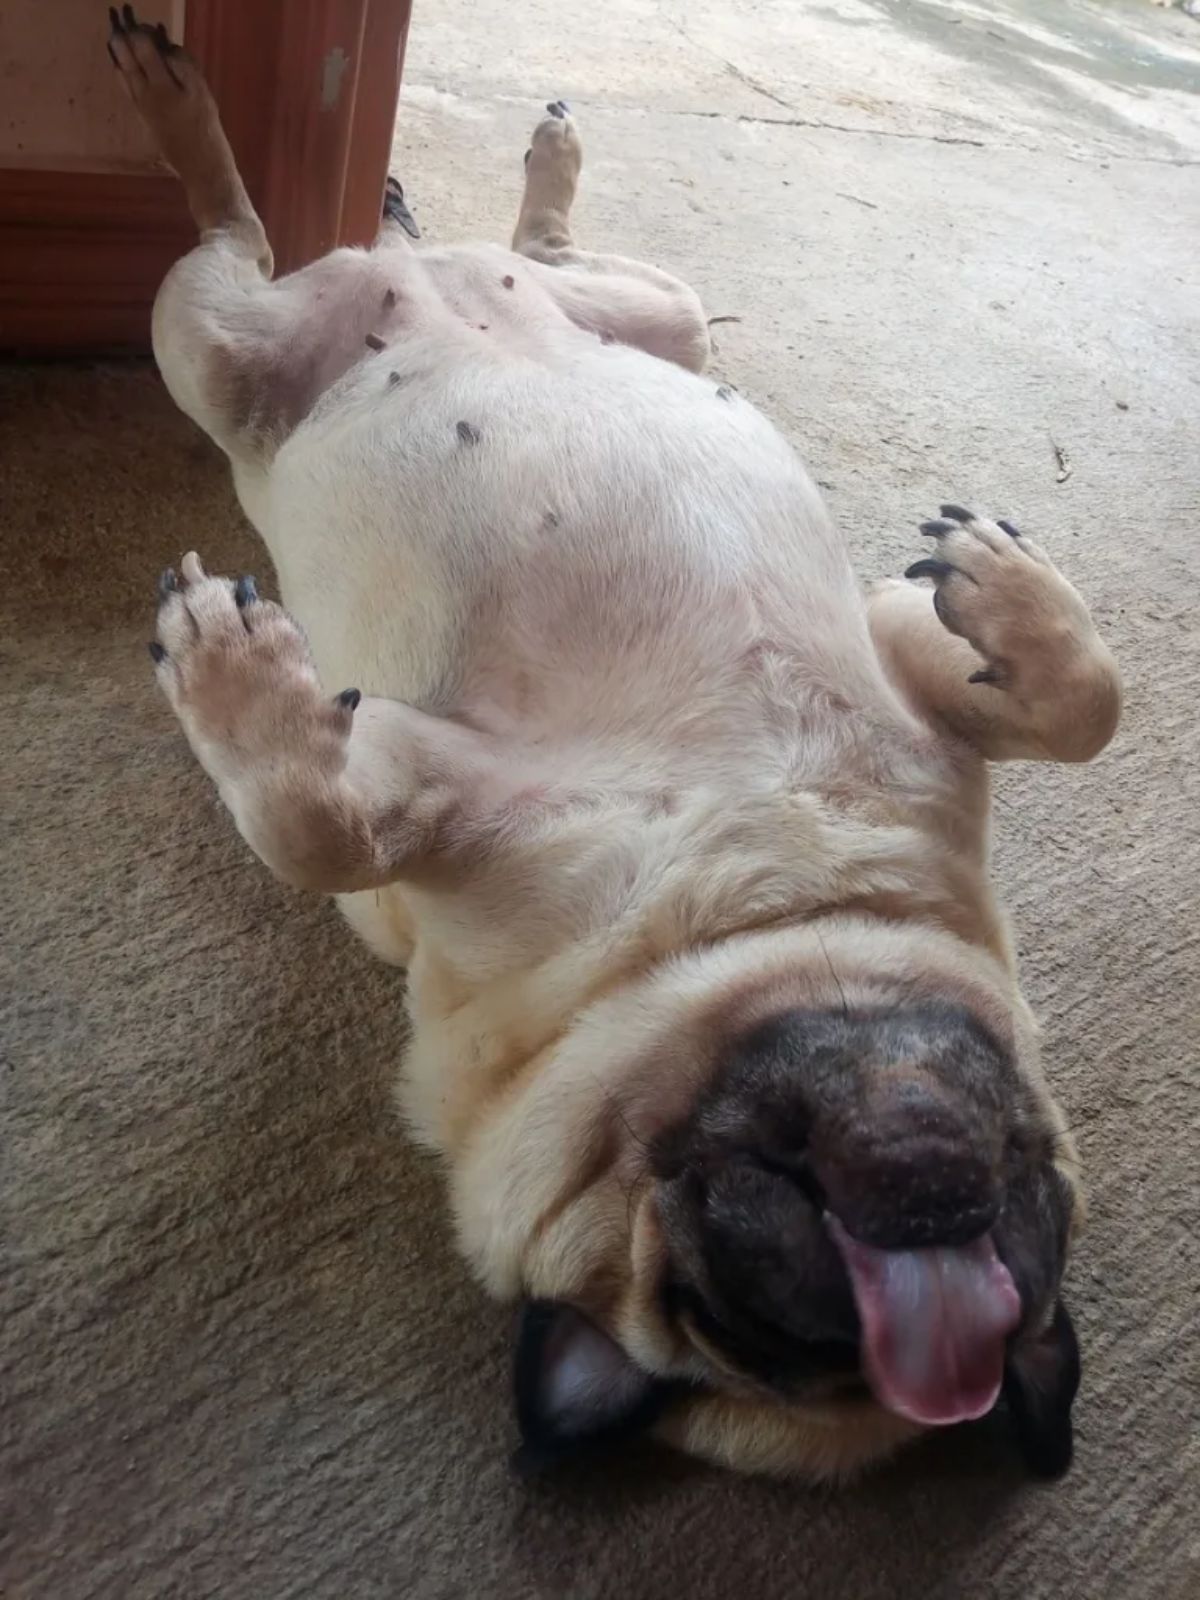 brown pug sleeping belly up with tongue sticking out on the floor